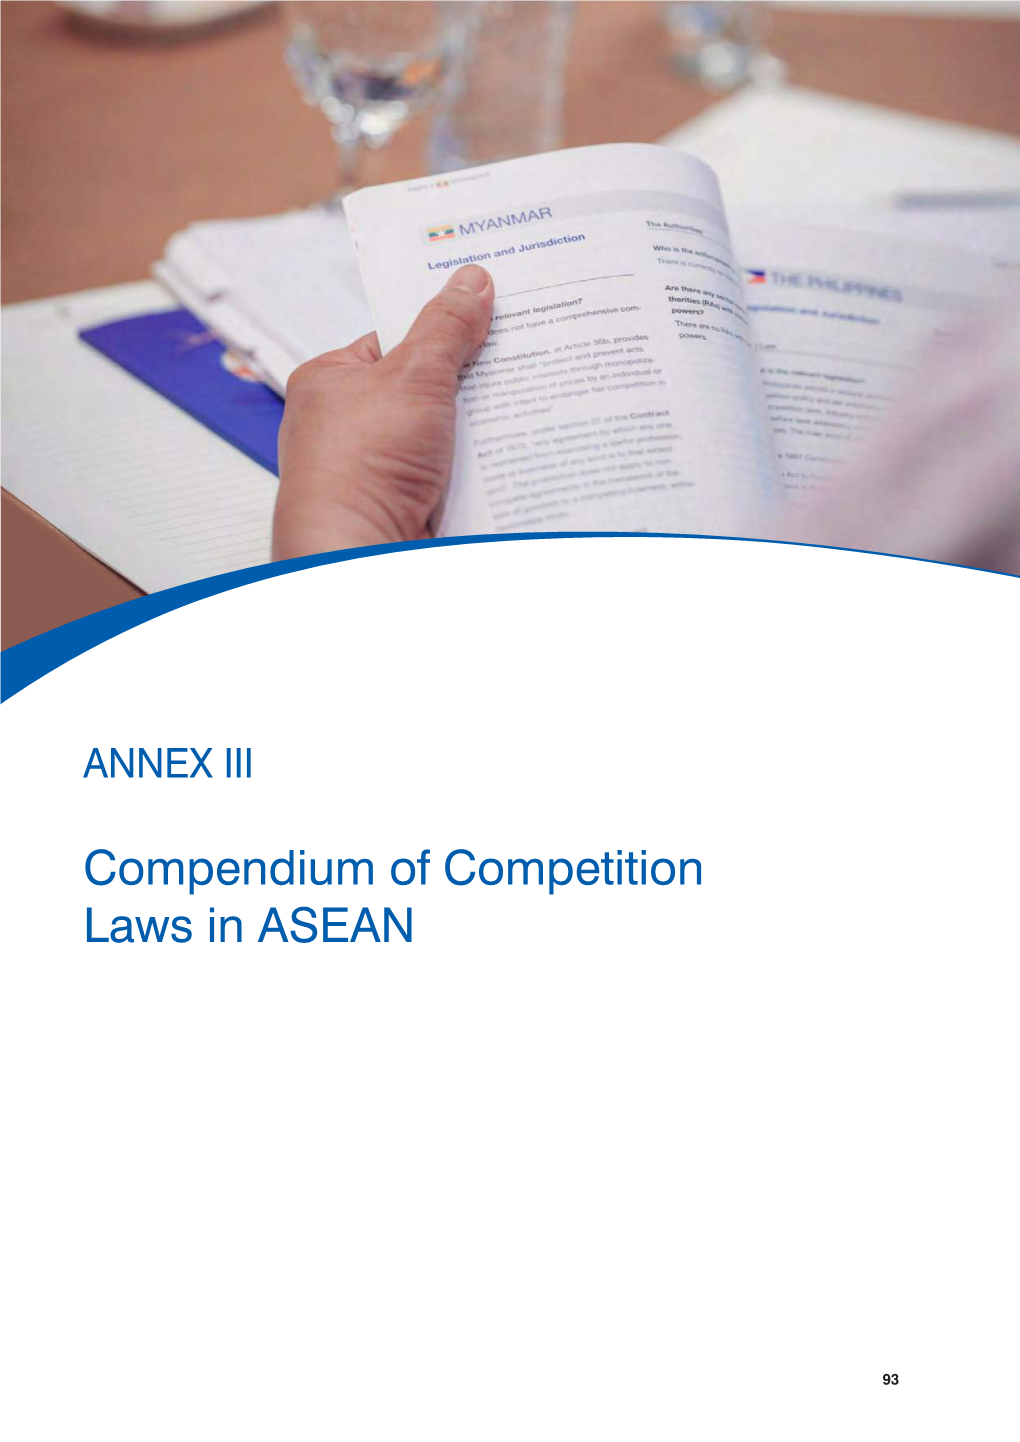 ANNEX III Compendium of Competition Laws in ASEAN